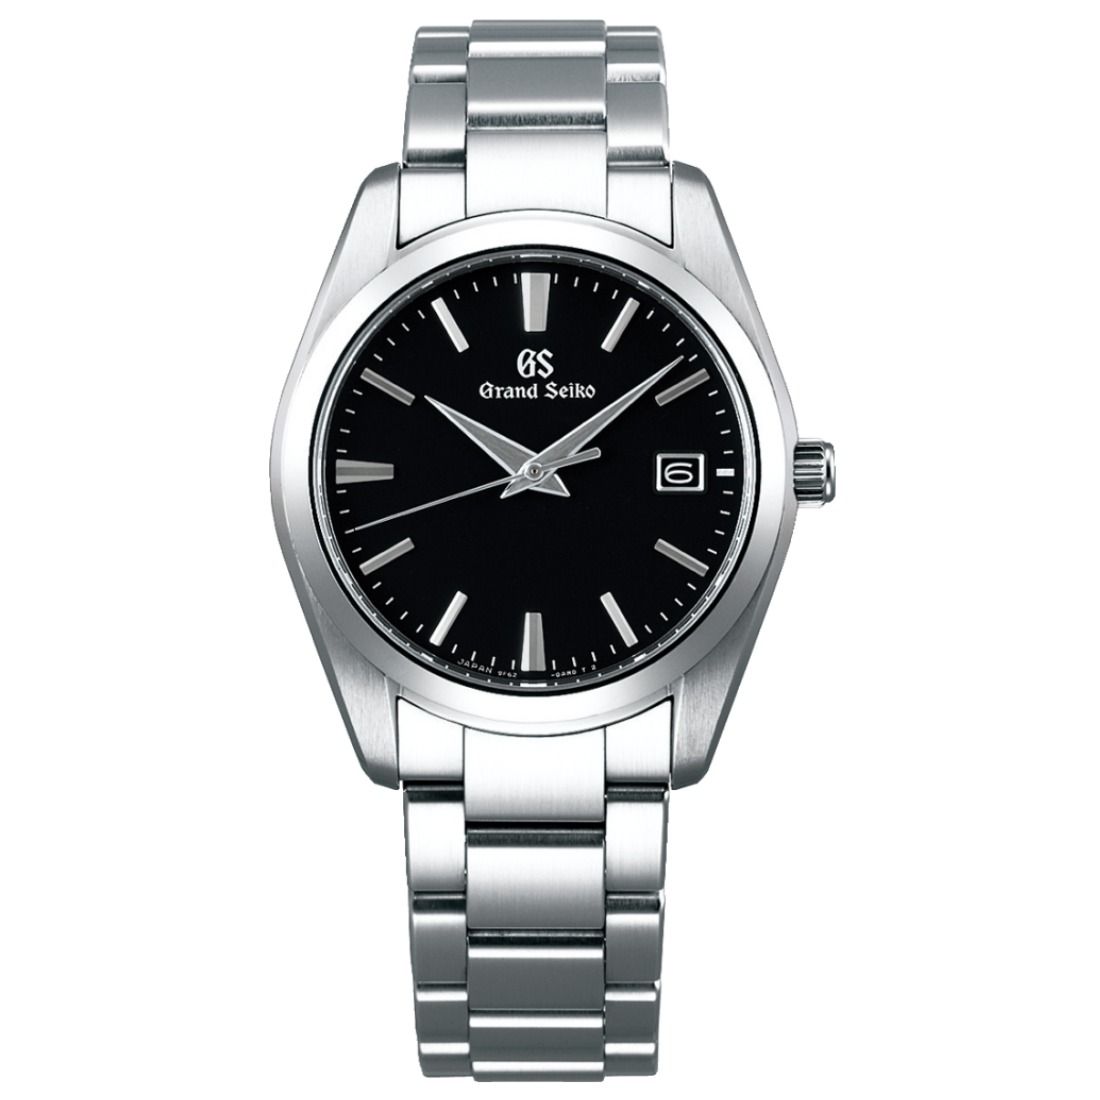 Grand Seiko GS SBGX261 SBGX261G Black Dial Heritage Collection Mens Watch